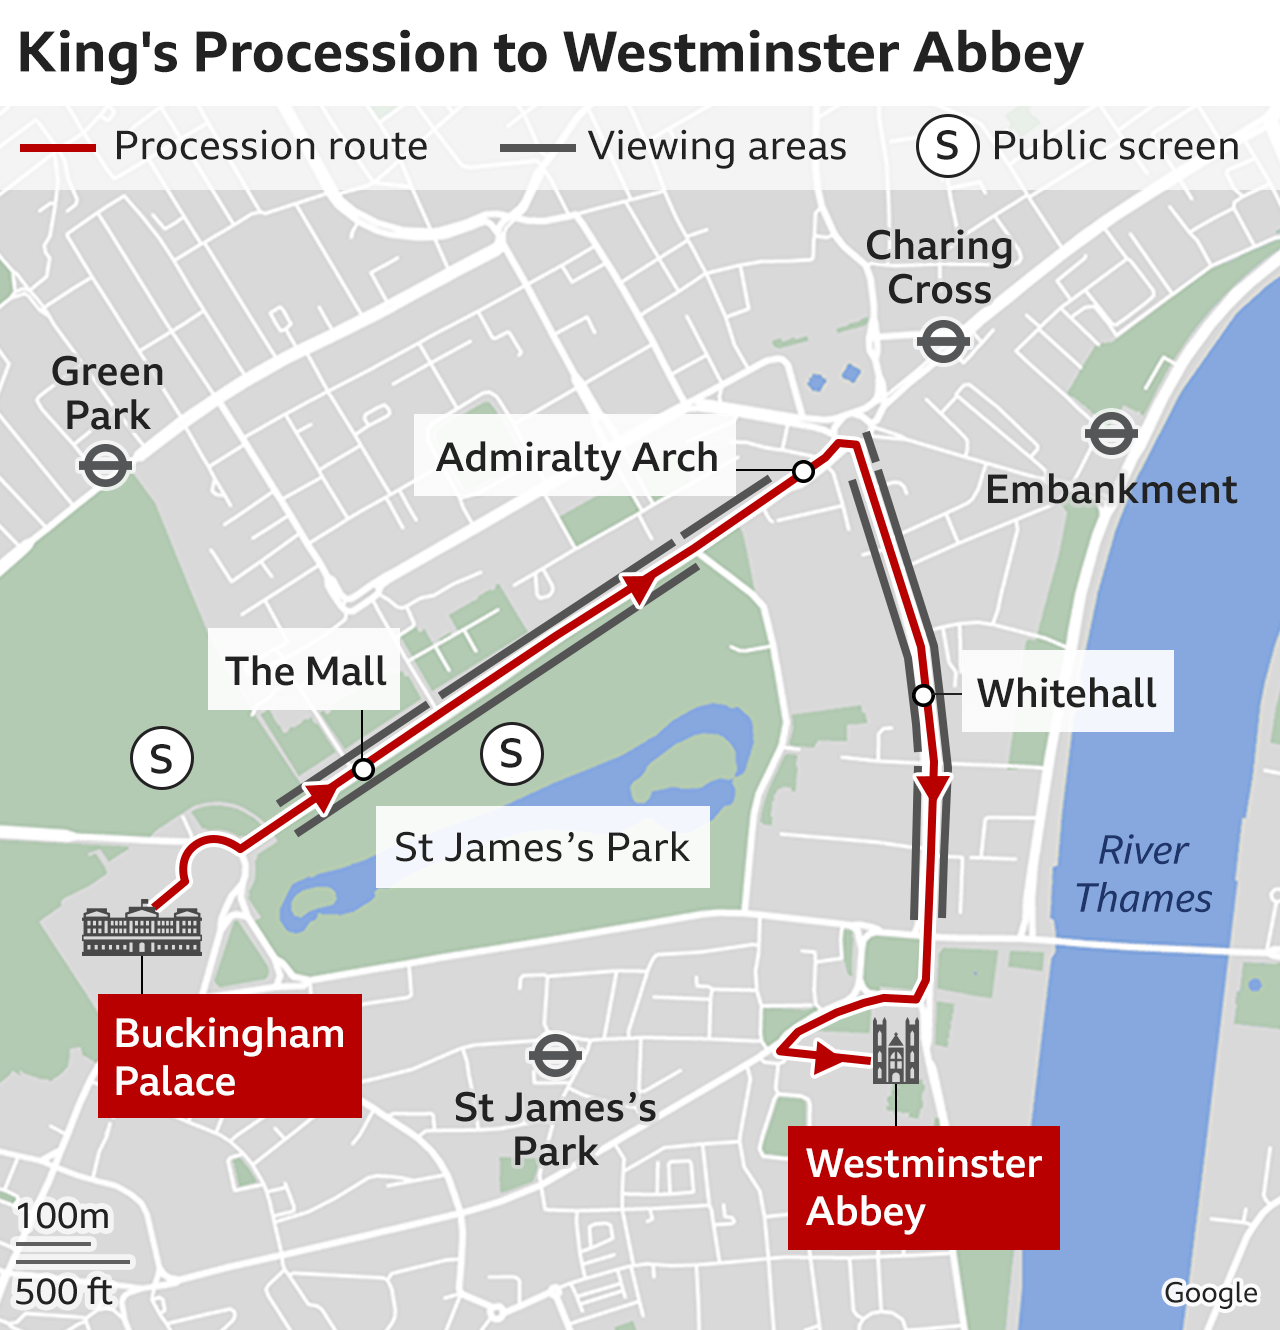 Map showing King's Procession route from Buckingham Palace along The Mall to Trafalgar Square, then down Whitehall and Parliament Street before turning into Parliament Square and Broad Sanctuary to reach the Great West Door of Westminster Abbey